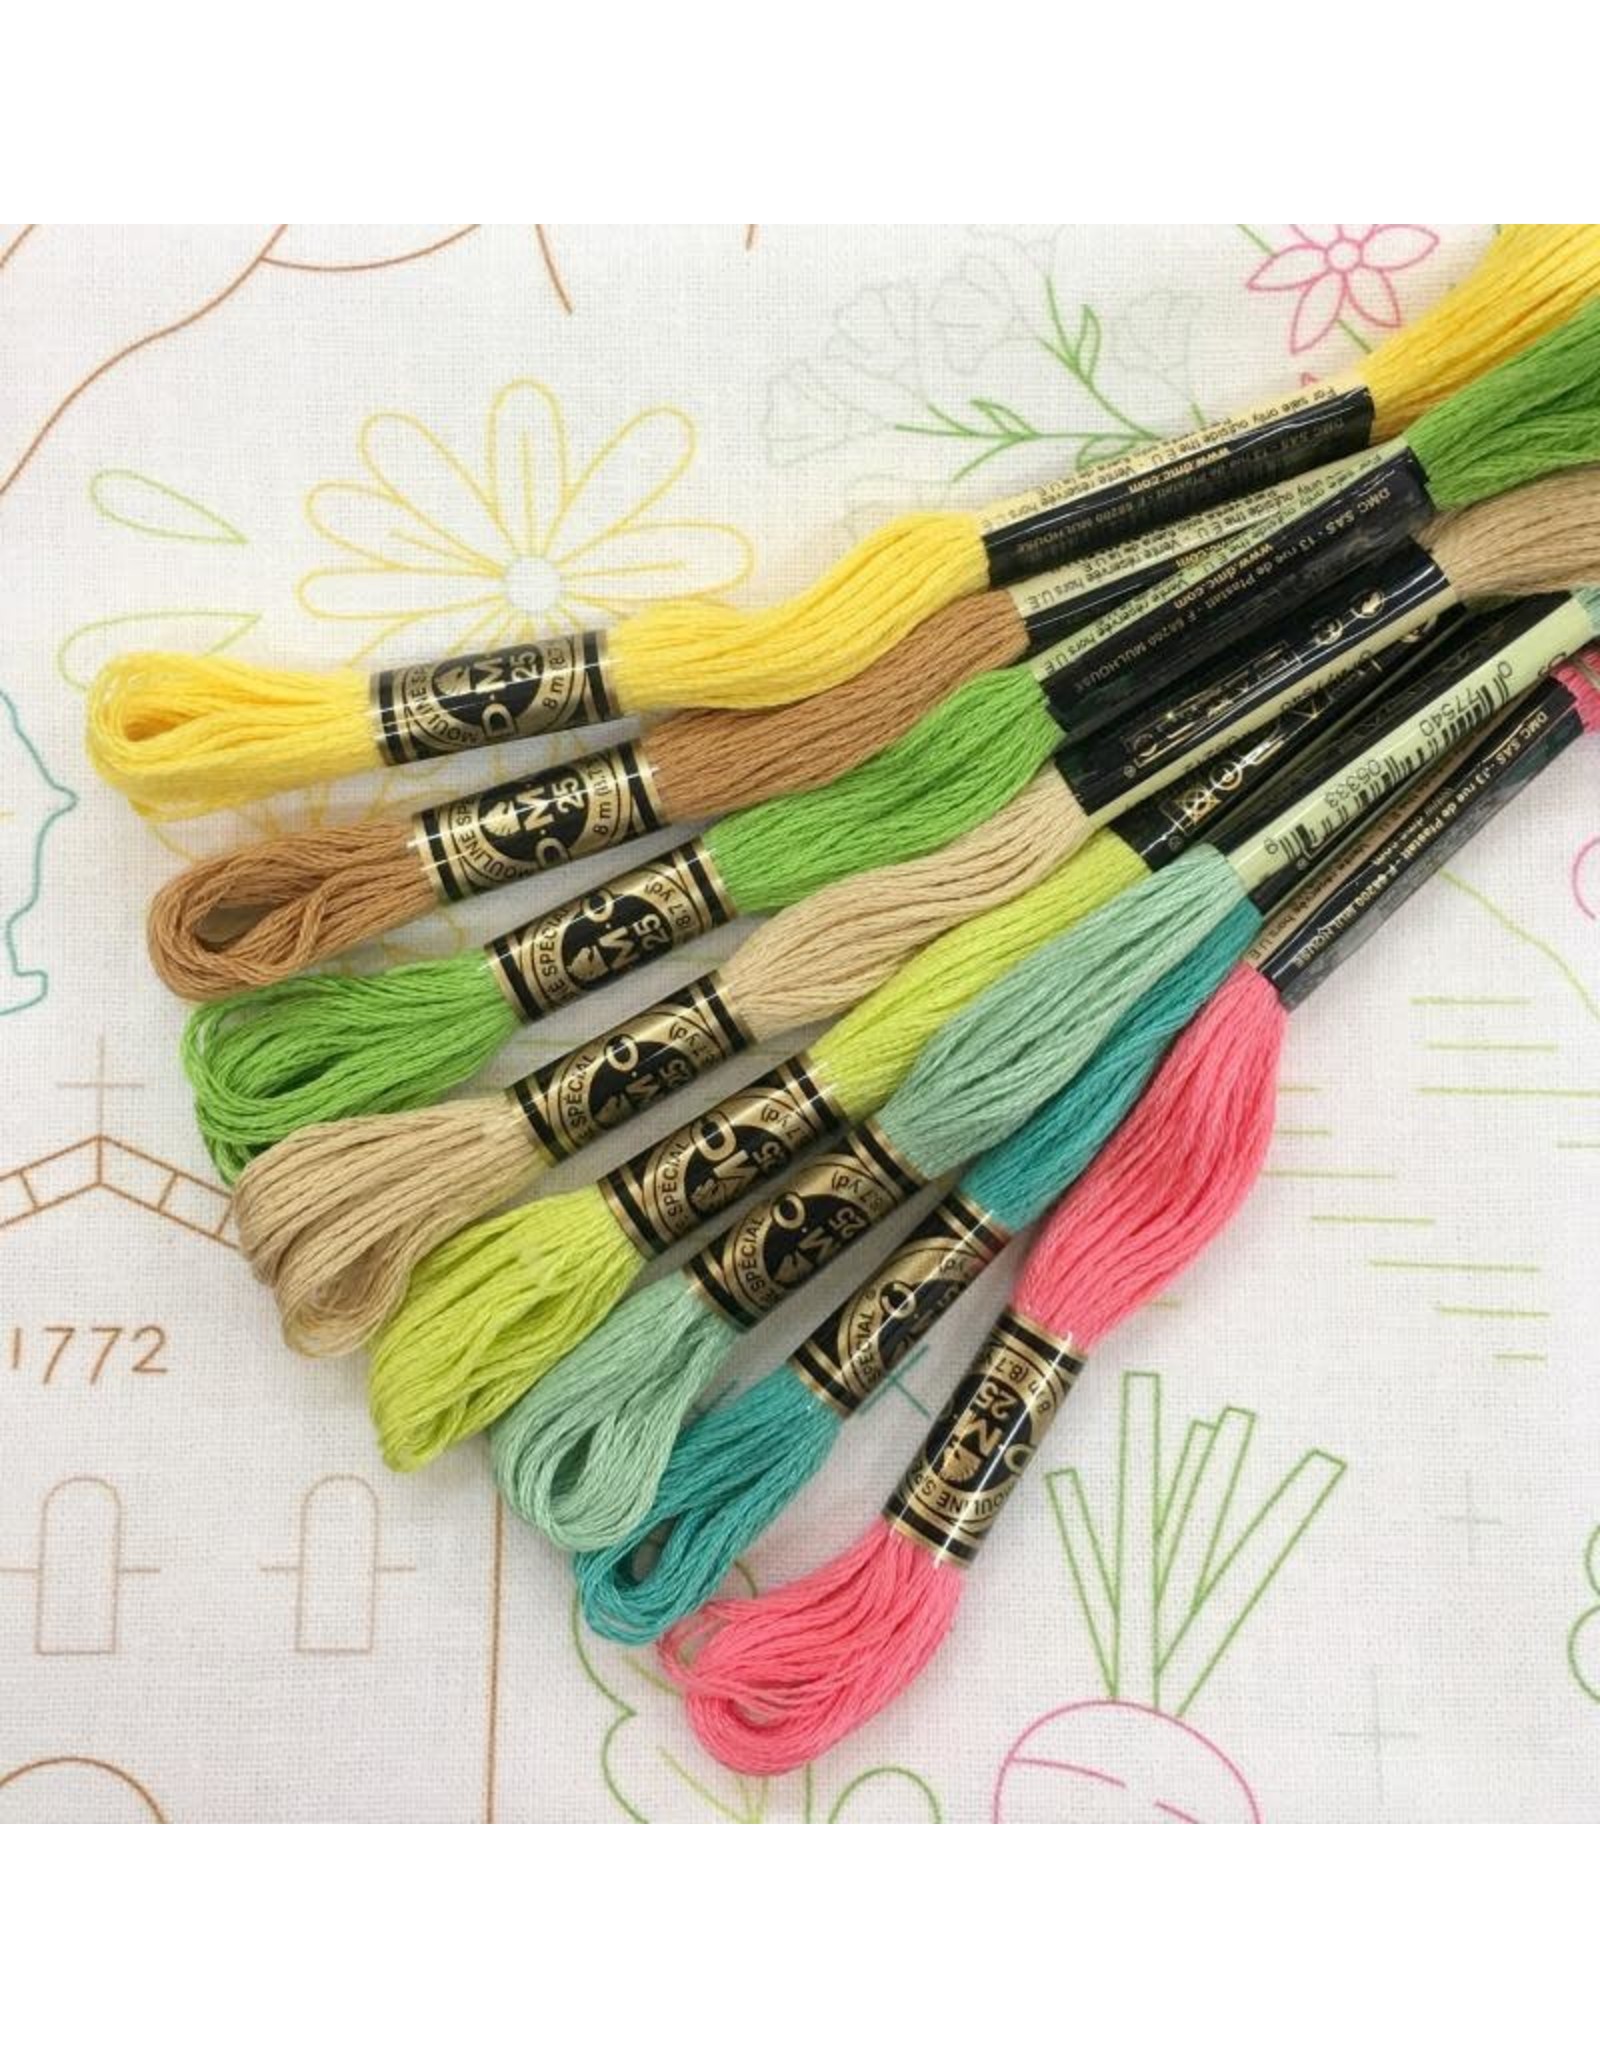 SLO City Embroidery Floss - Sets of Eight 8.75 yard skeins - Picking Daisies